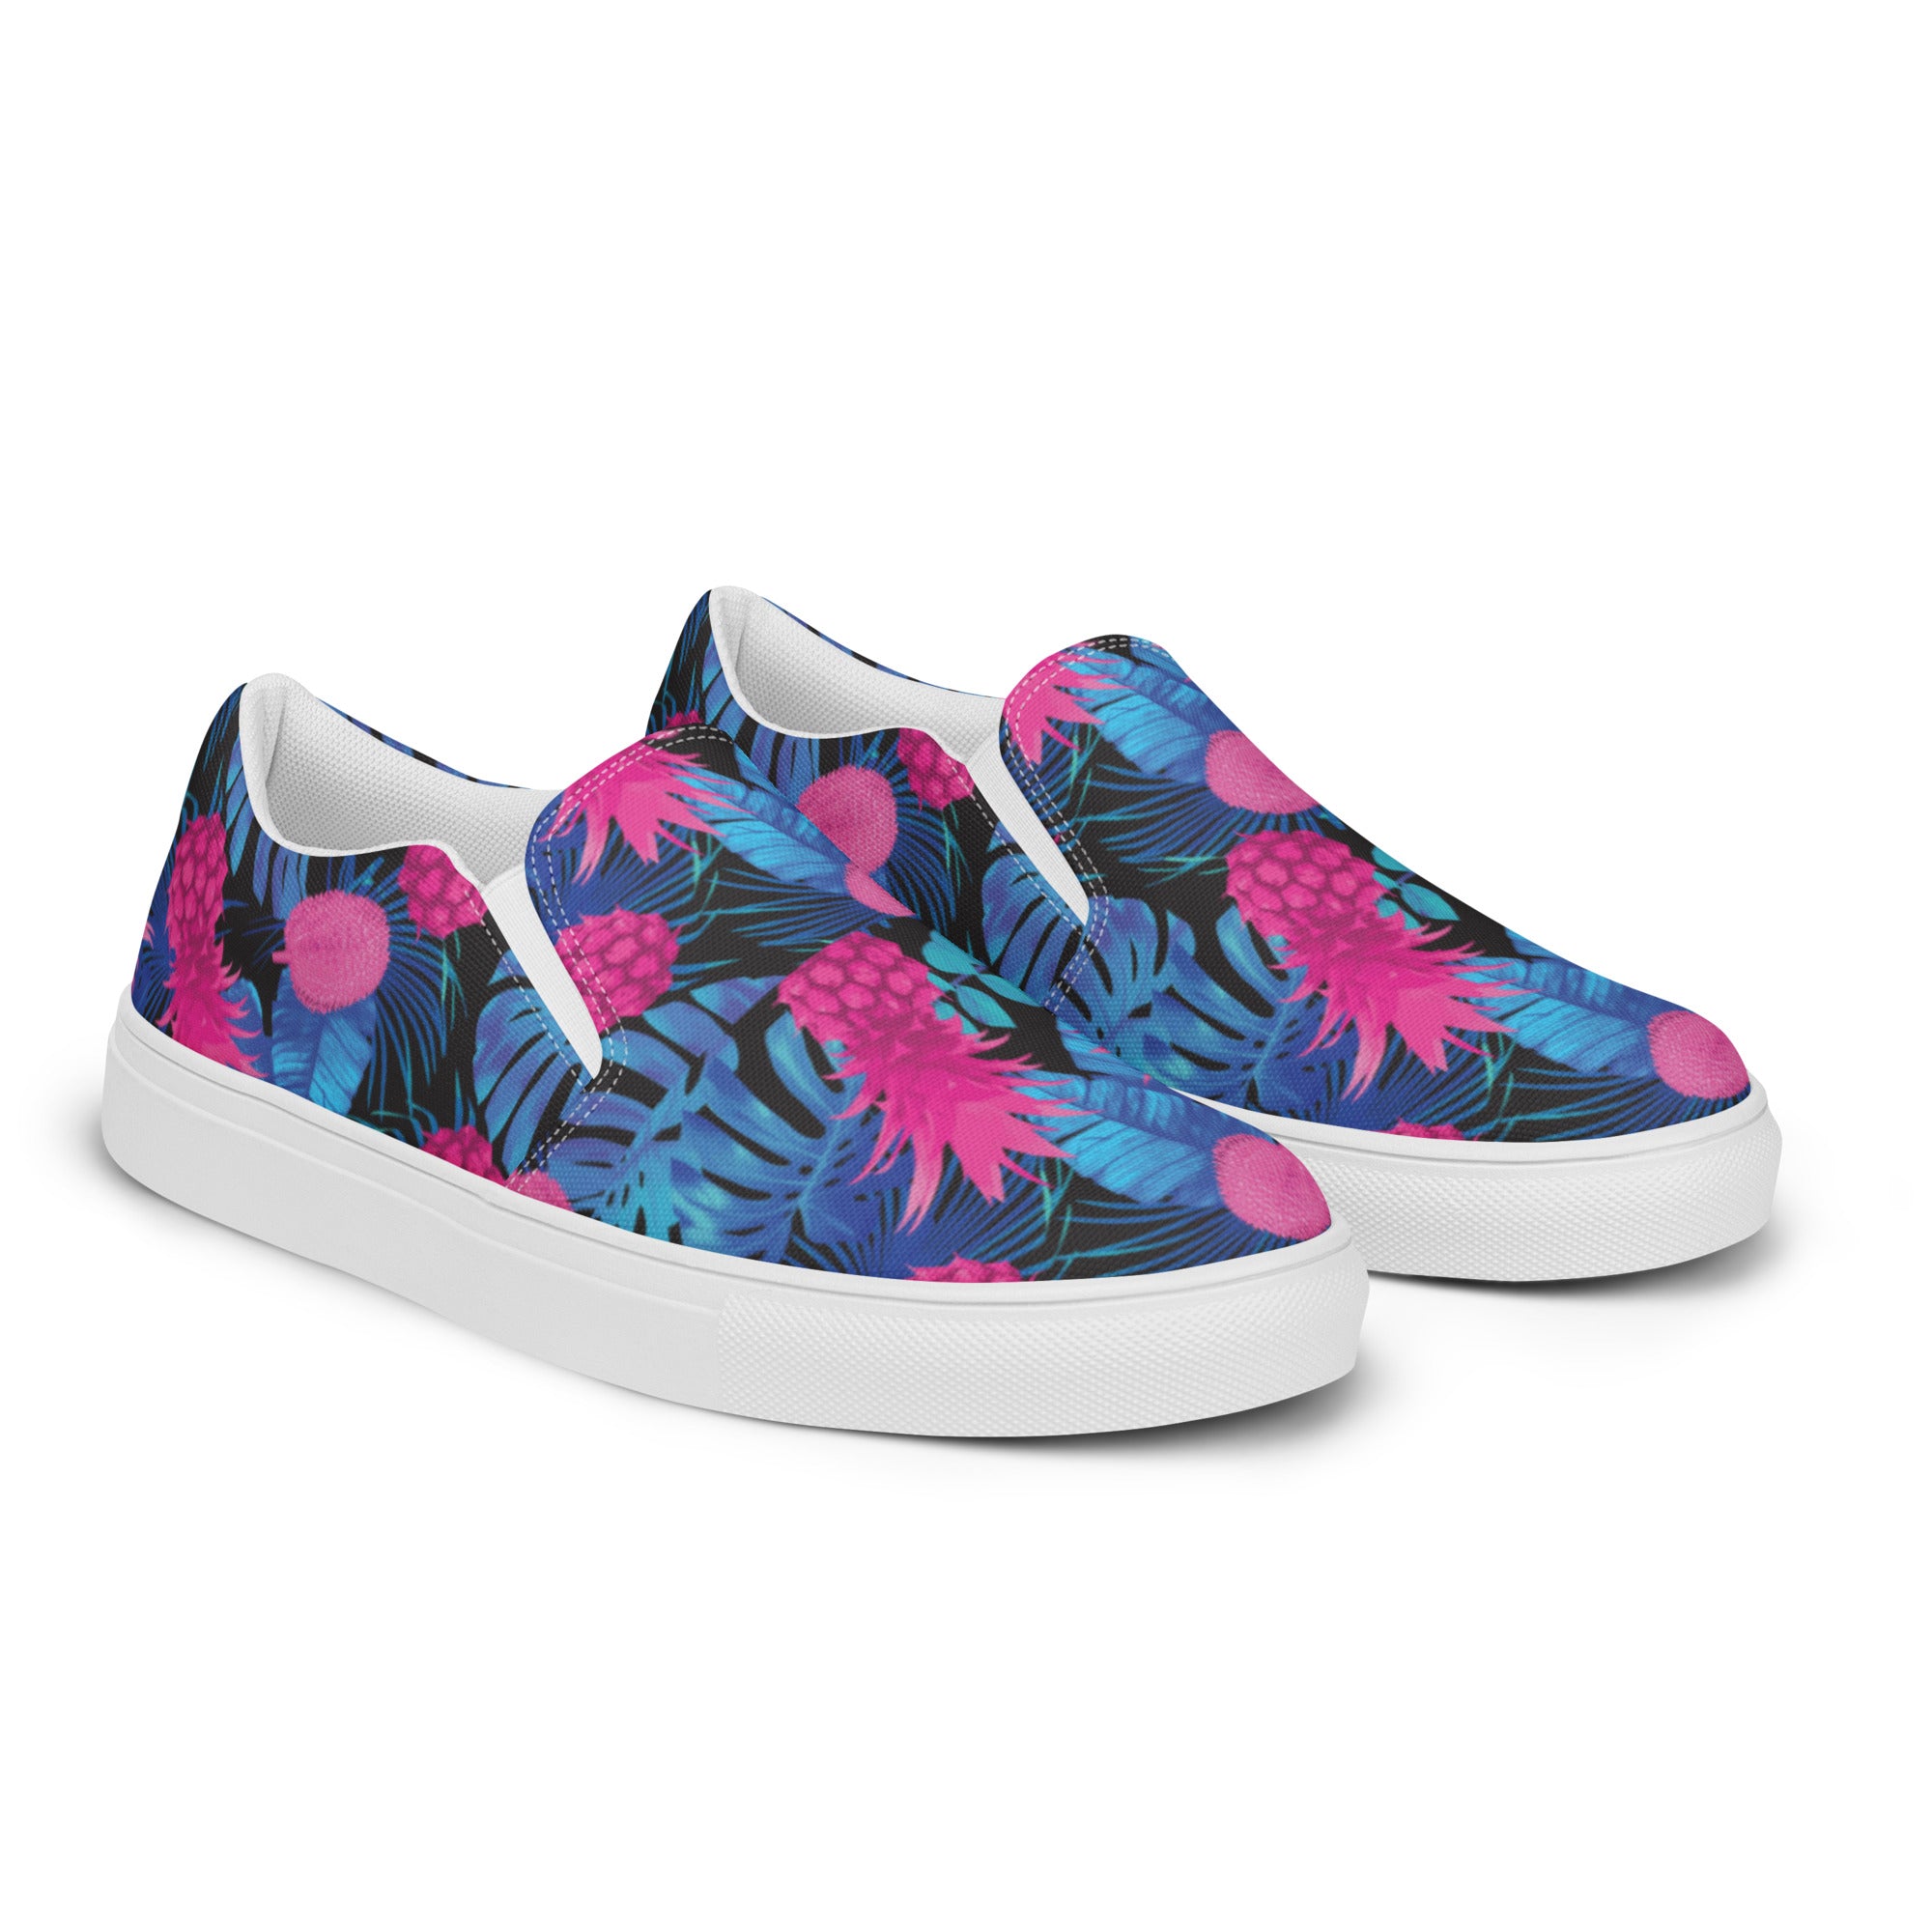 Rad Palm Pineapple Express Women’s Slip On Canvas Shoes